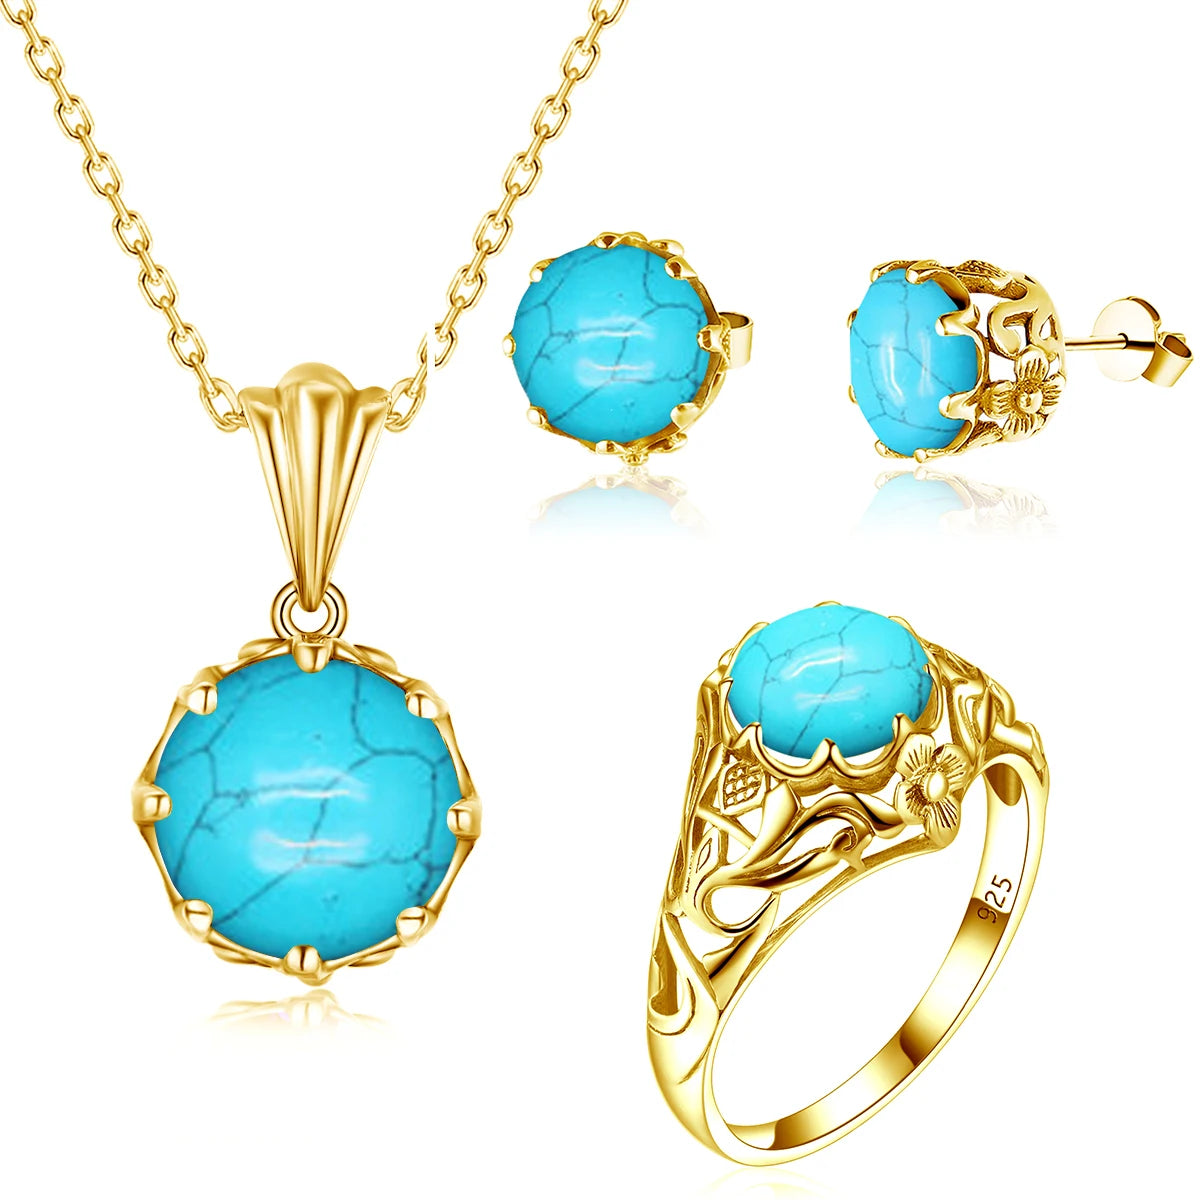 14K Gold Plated Jewelry Sets Real 925 Sterling Silver Turquoise Gemstones14K GoldCHINA